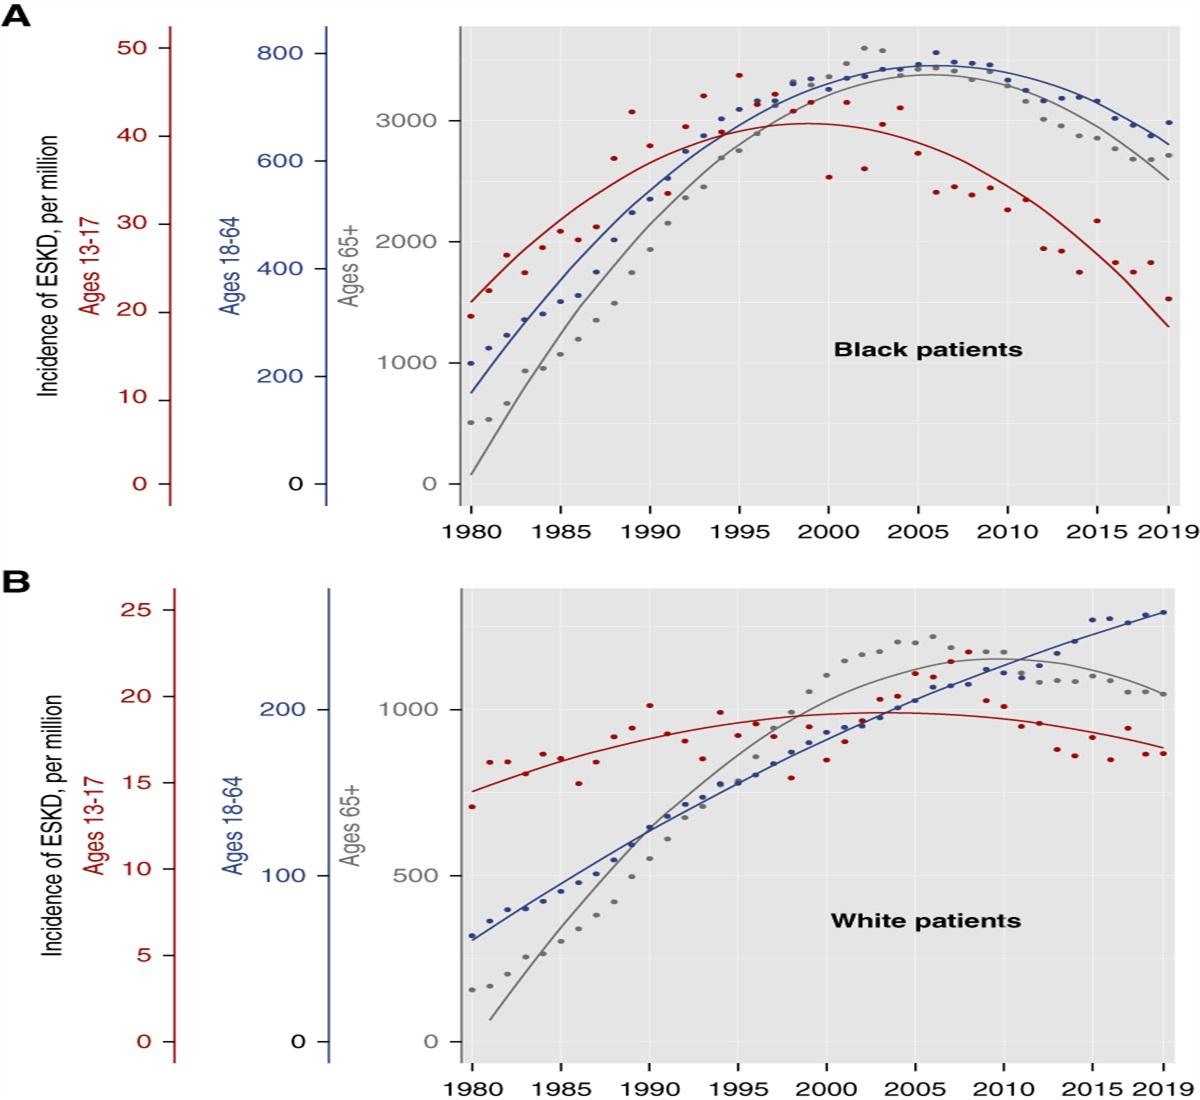 Age- and Race-Specific Changes in ESKD Incidence over Four Decades